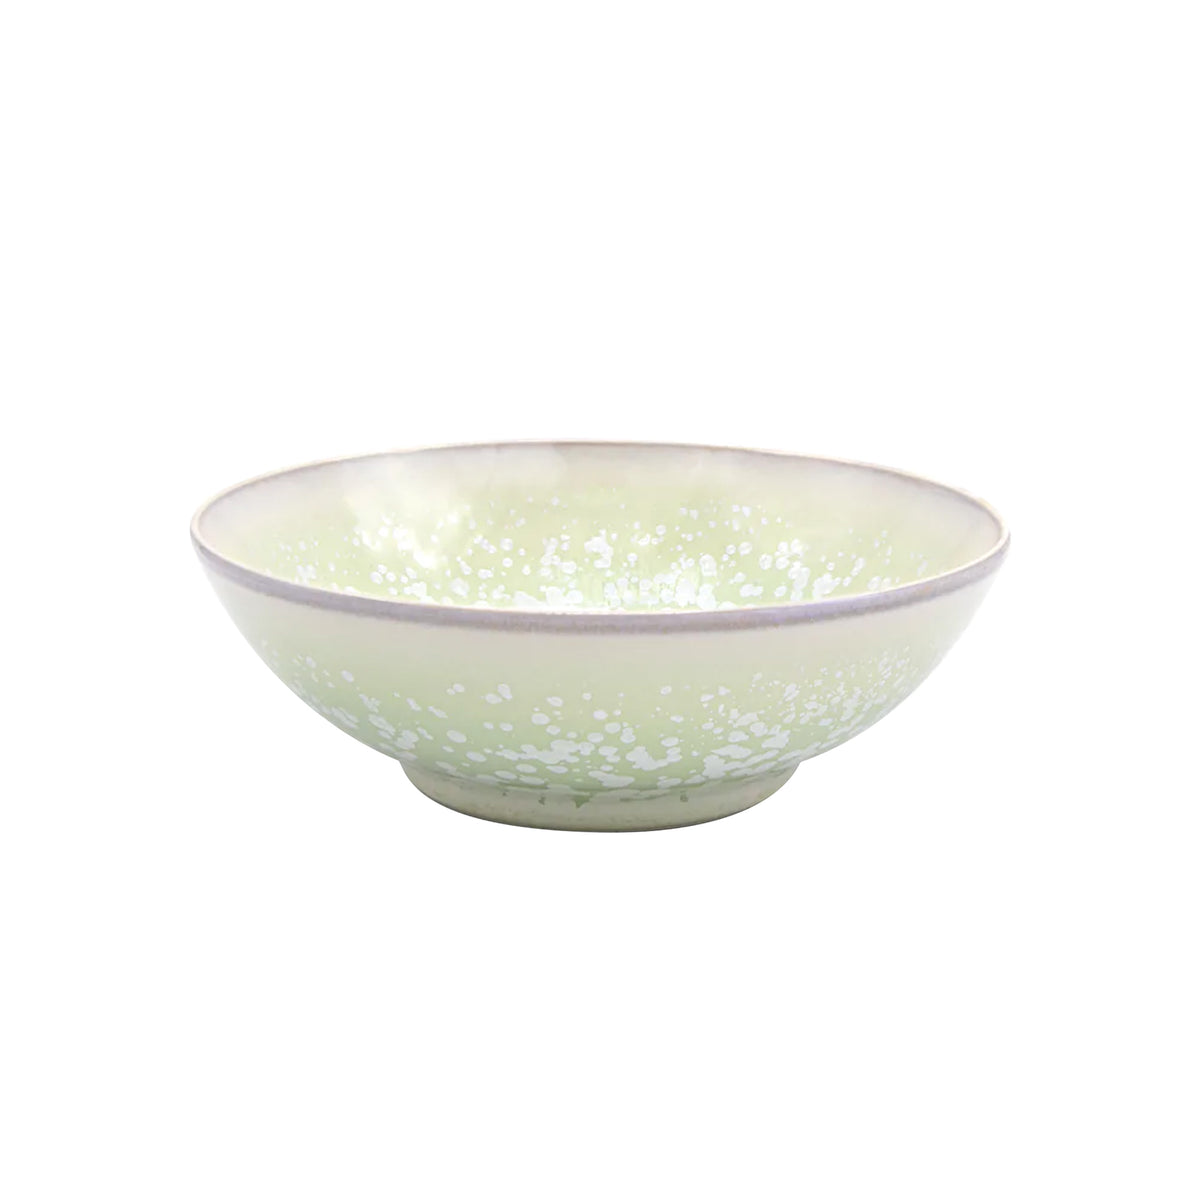 SONG Almond - Salad bowl PM